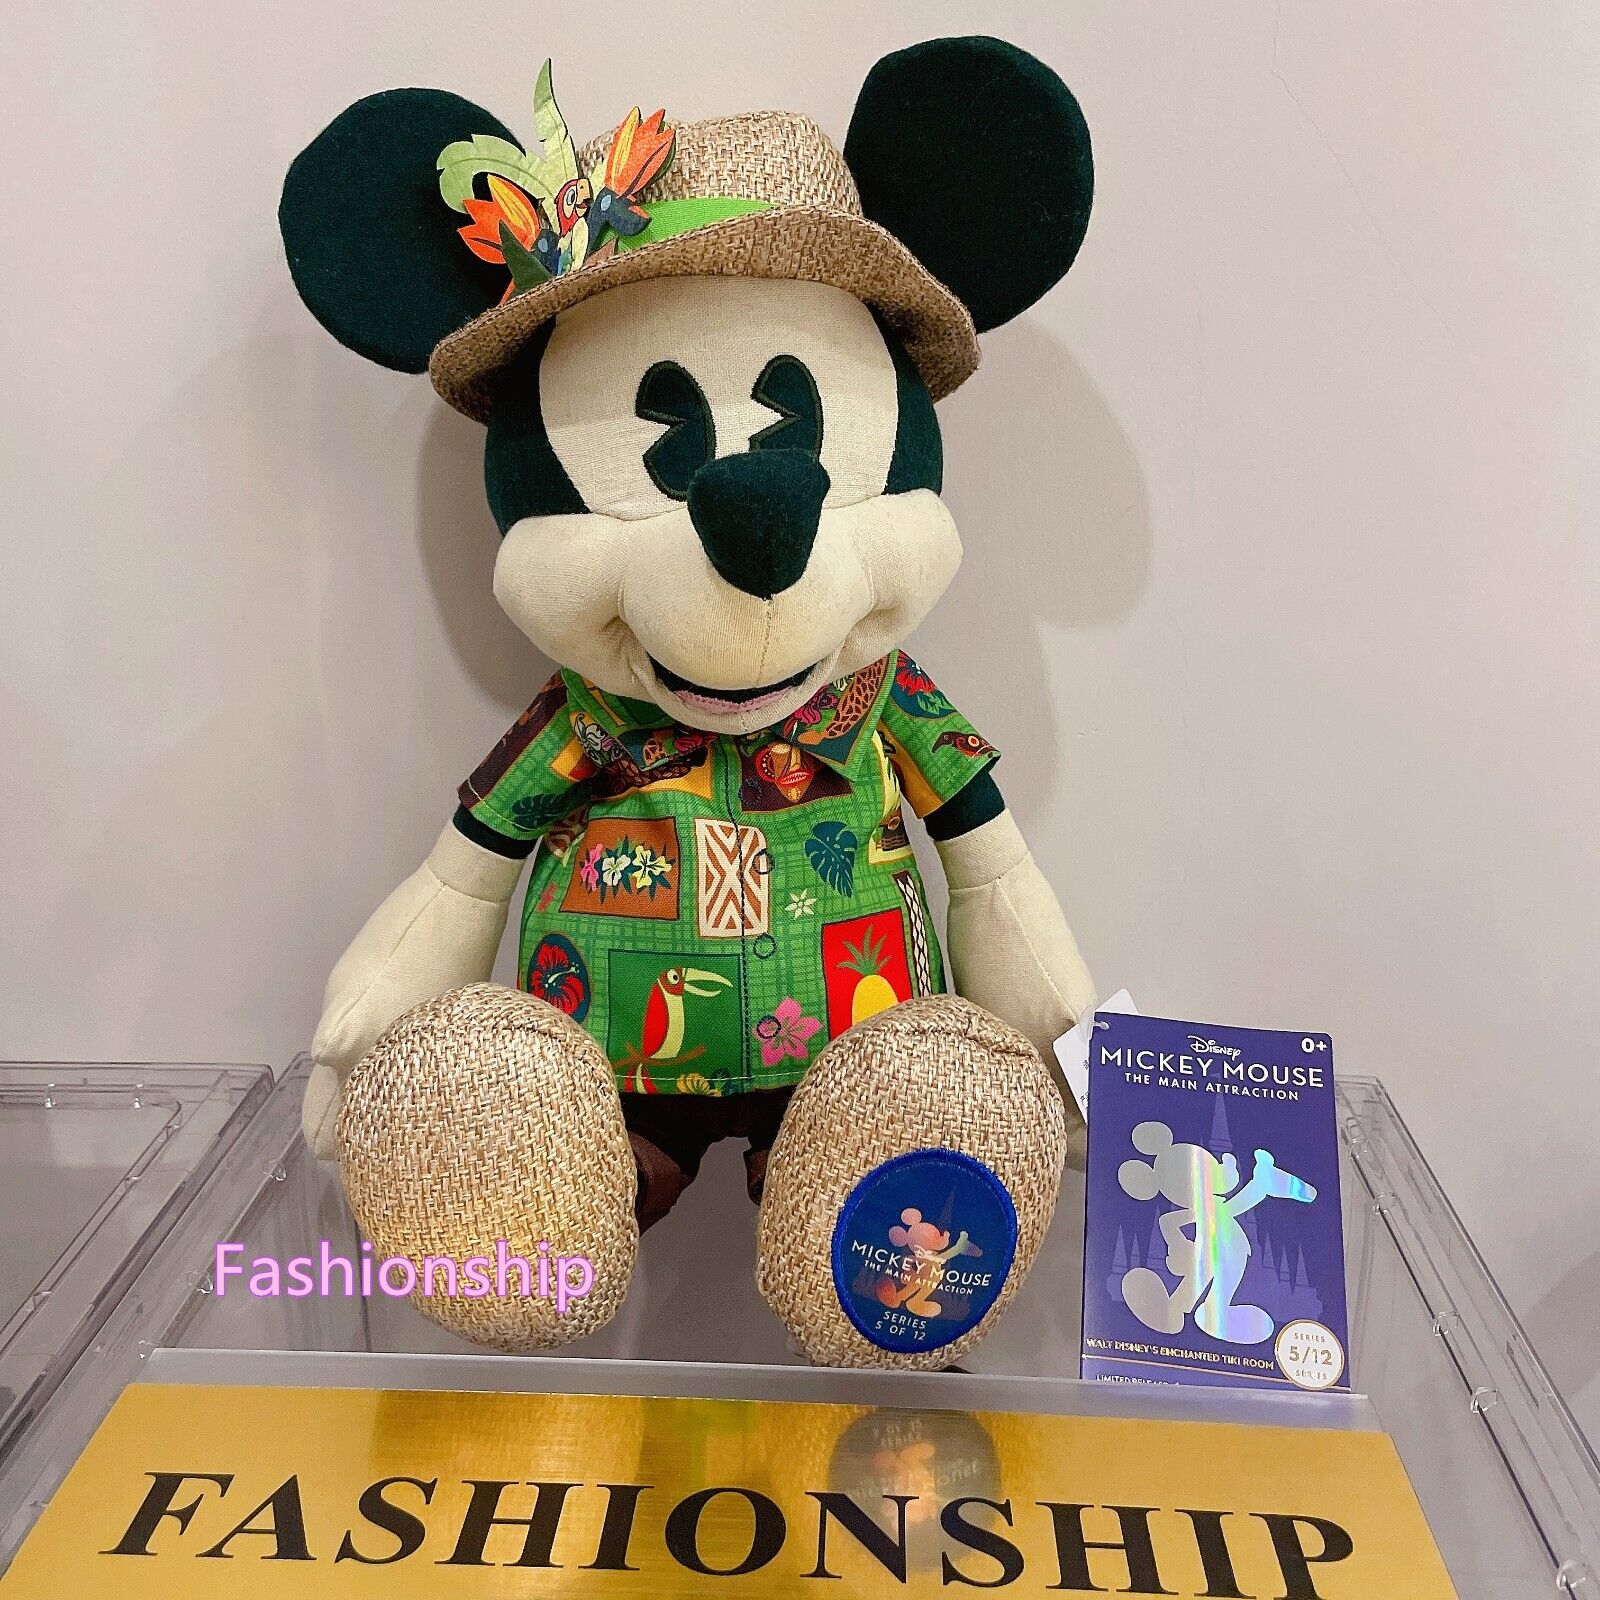 Disney store Shanghai Mickey mouse the main attraction May Plush Tiki room 5th